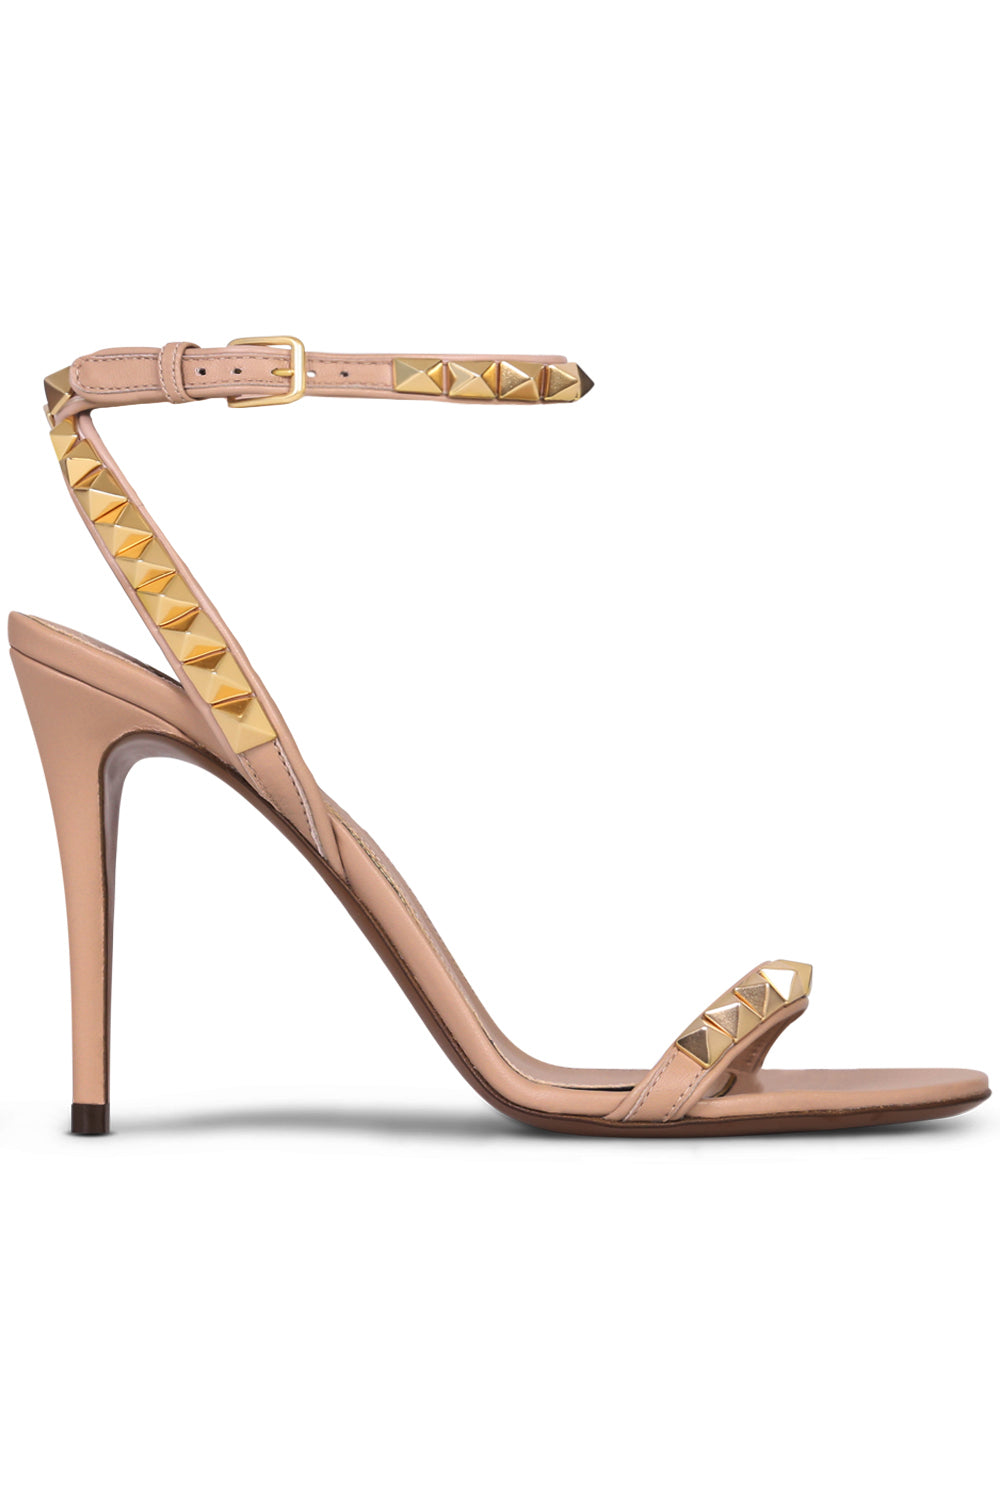 VALENTINO SHOES SMALL STUD 100MM SANDAL | ROSE CANNELLE